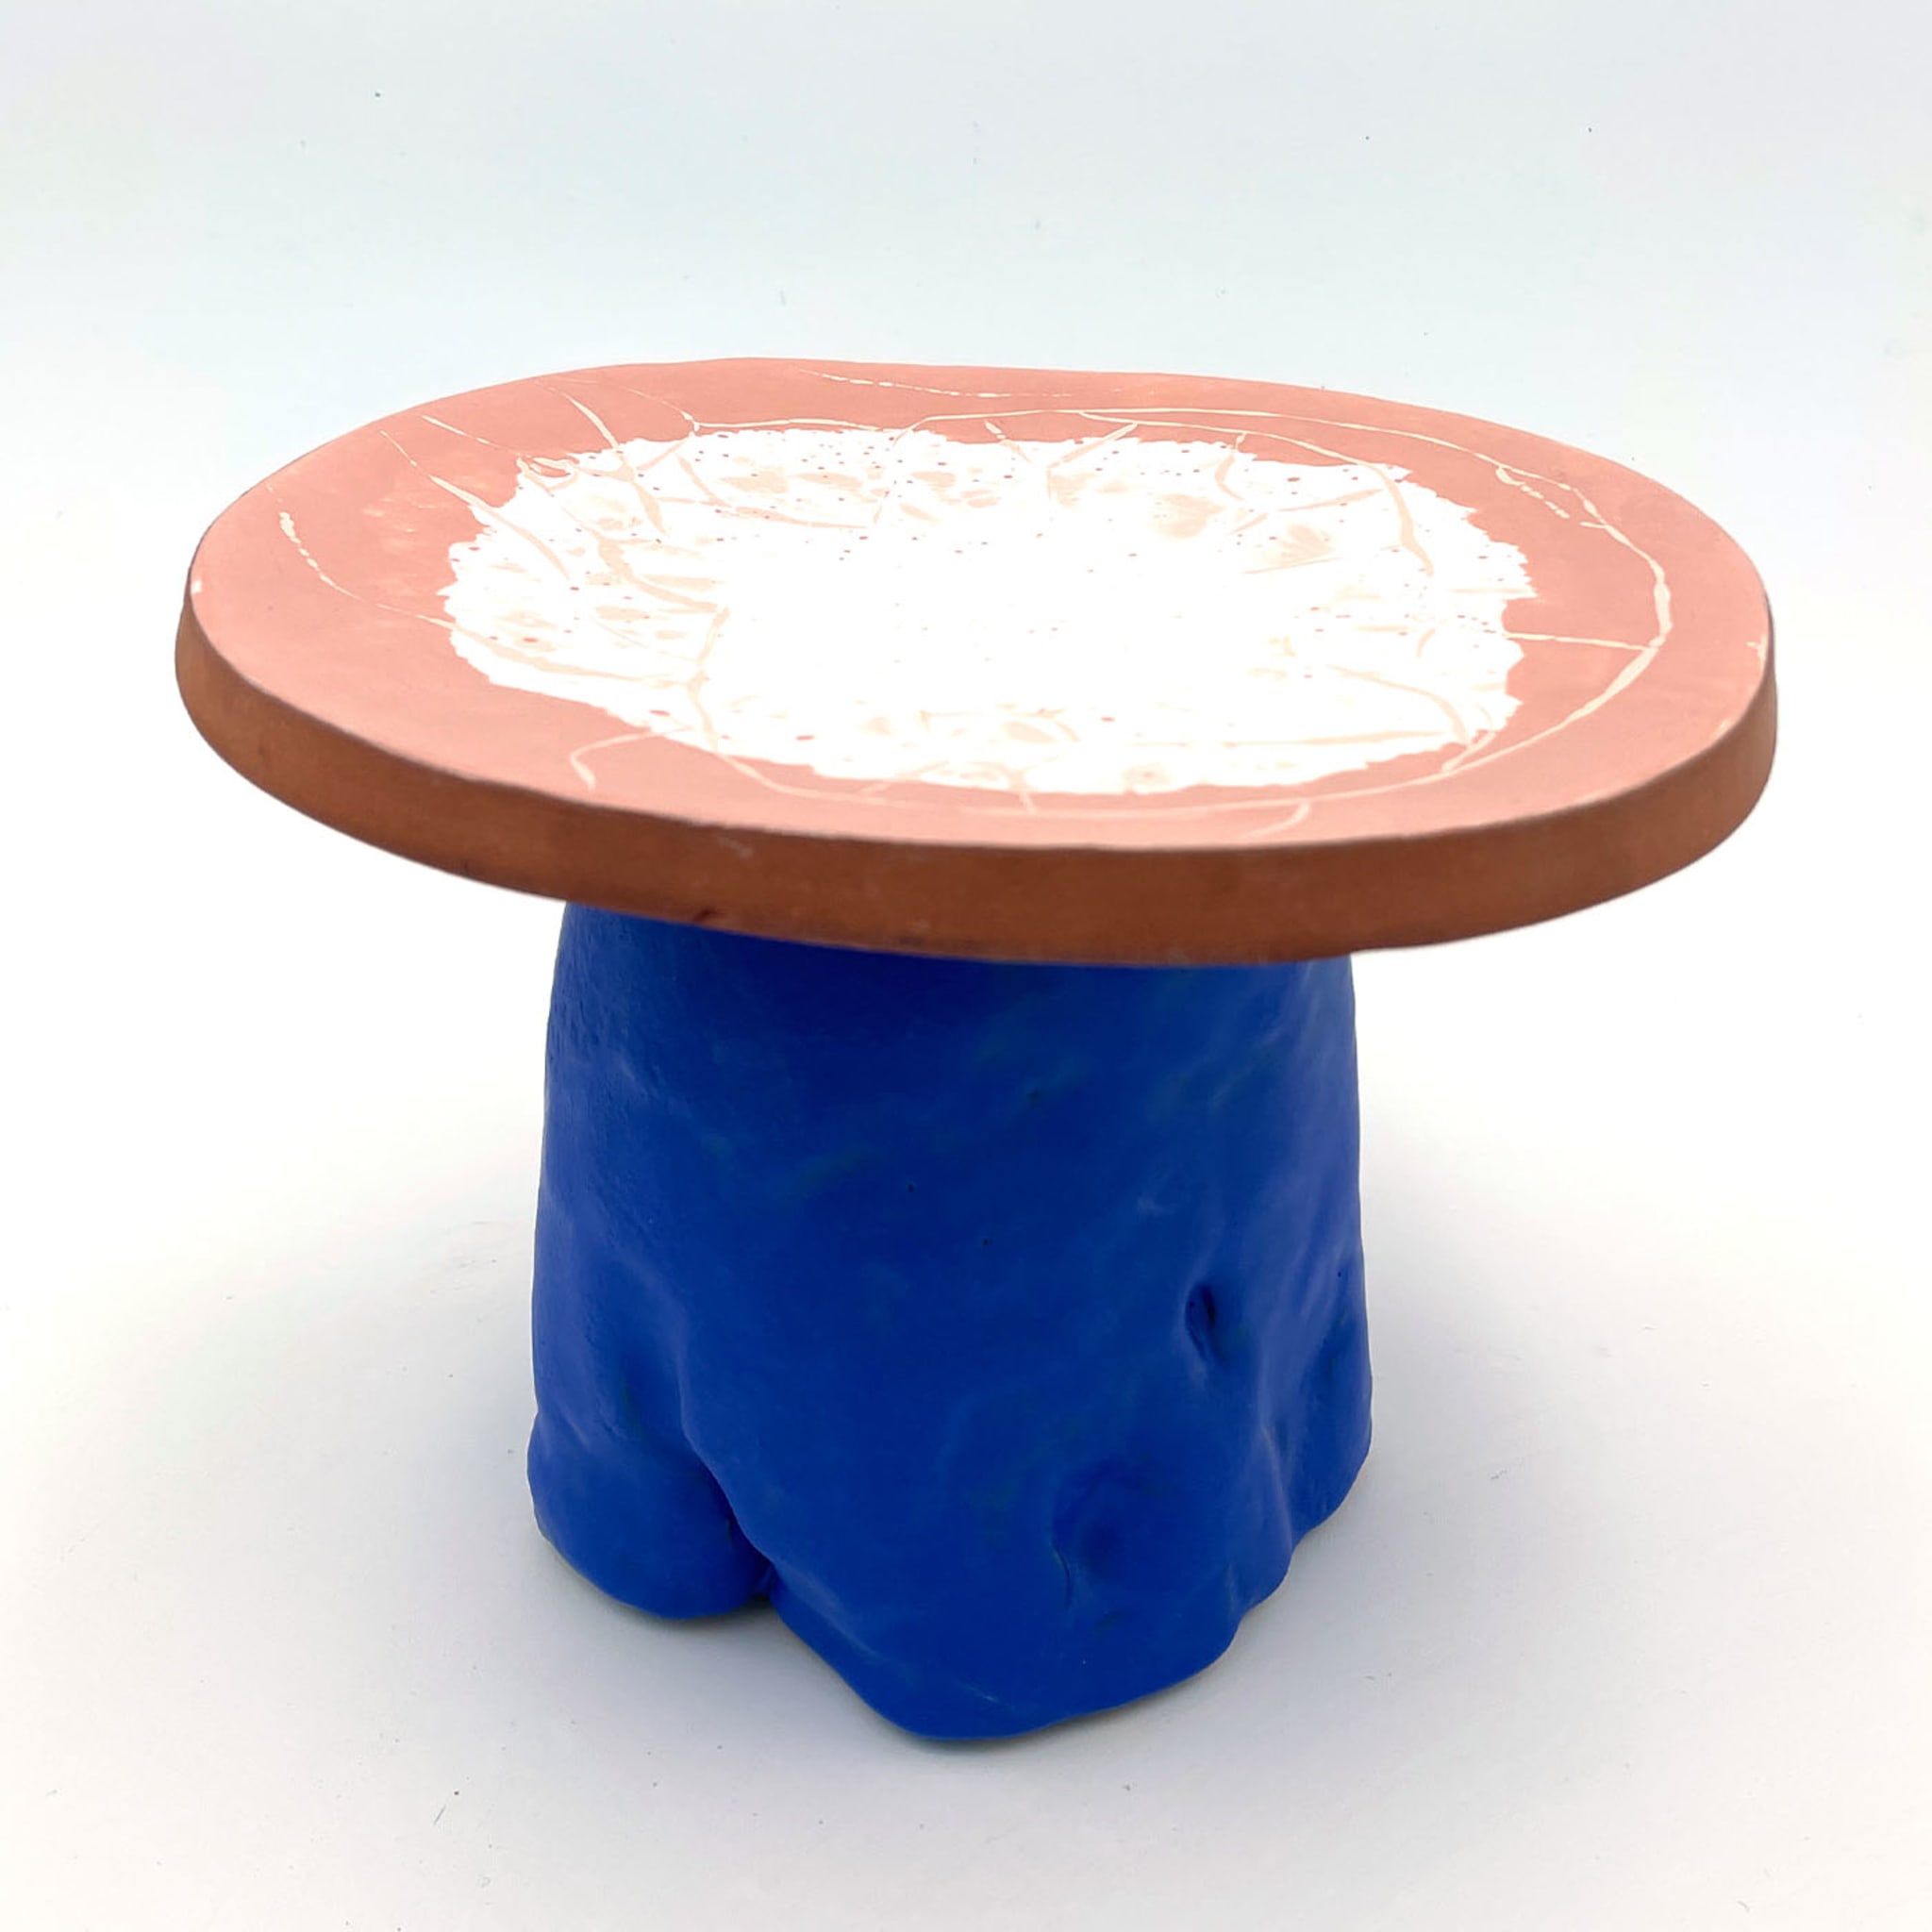 Fungo Rock Egyptian Blue and Powder Pink Cake Stand - Alternative view 4